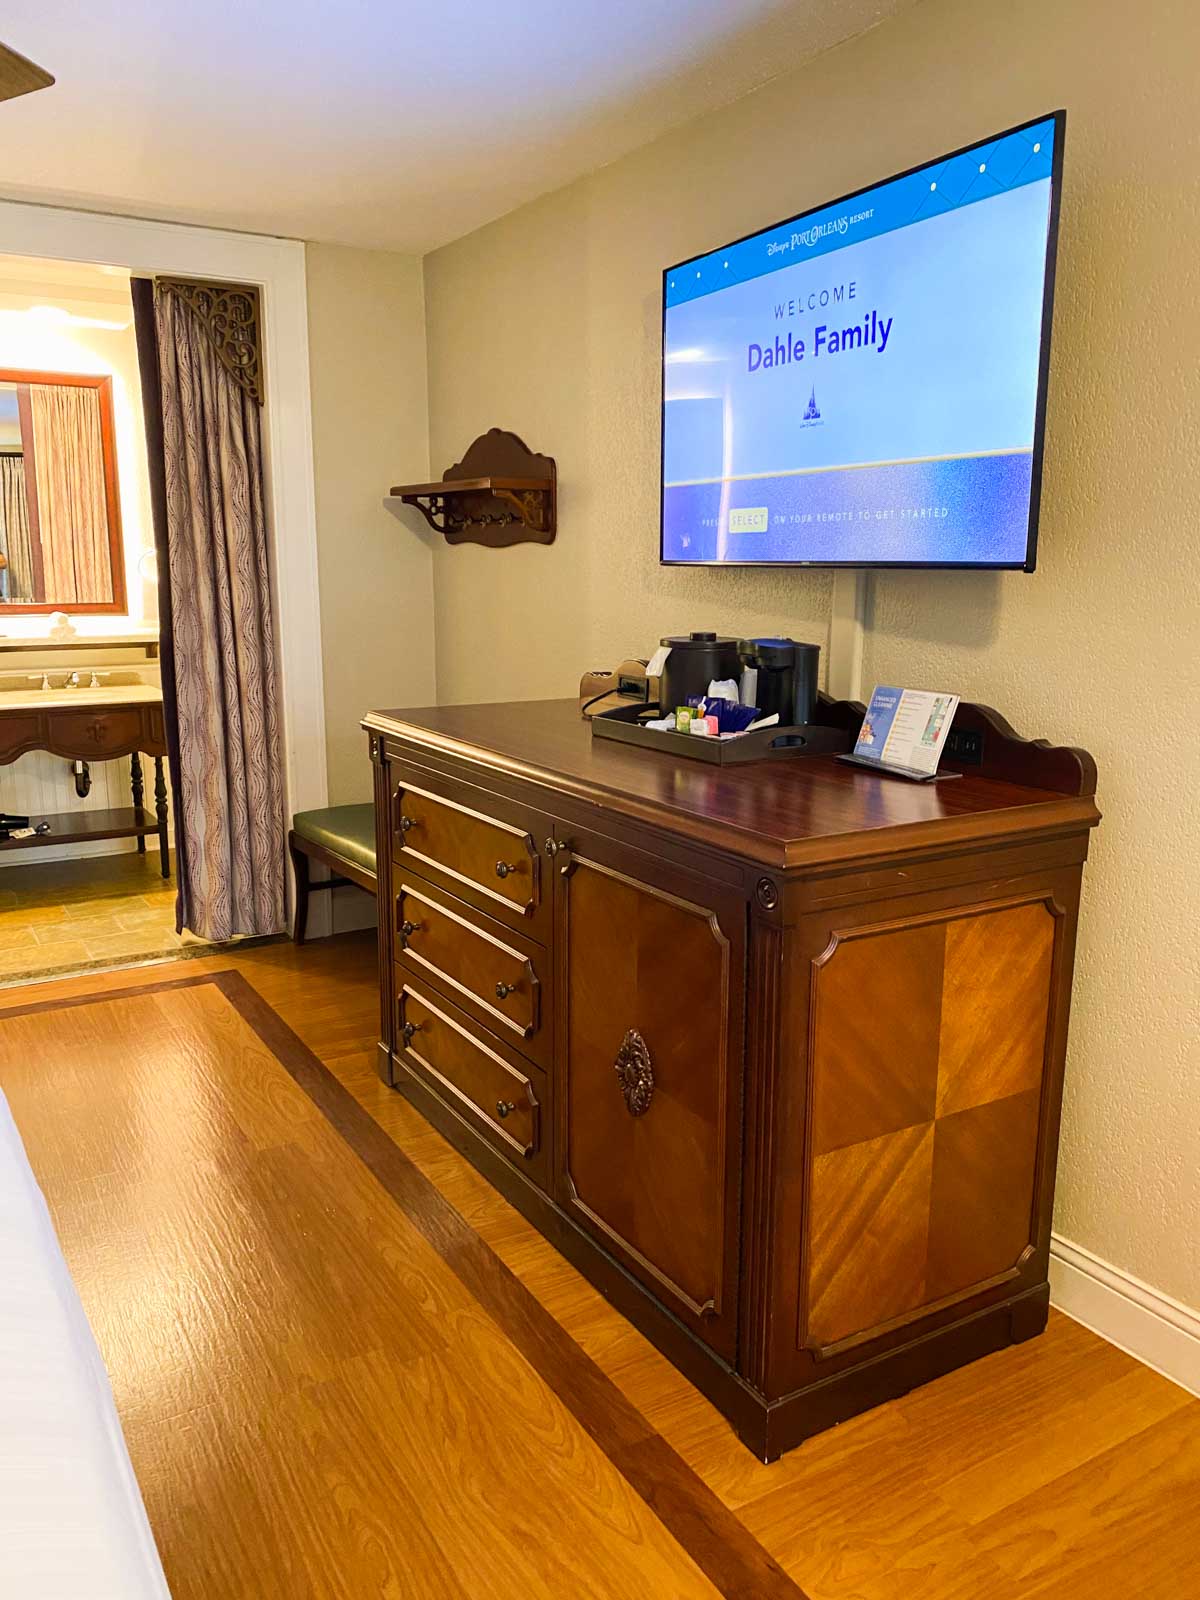 The welcome message is on the tv and the mini fridge is hidden inside a wooden dresser with lots of storage.